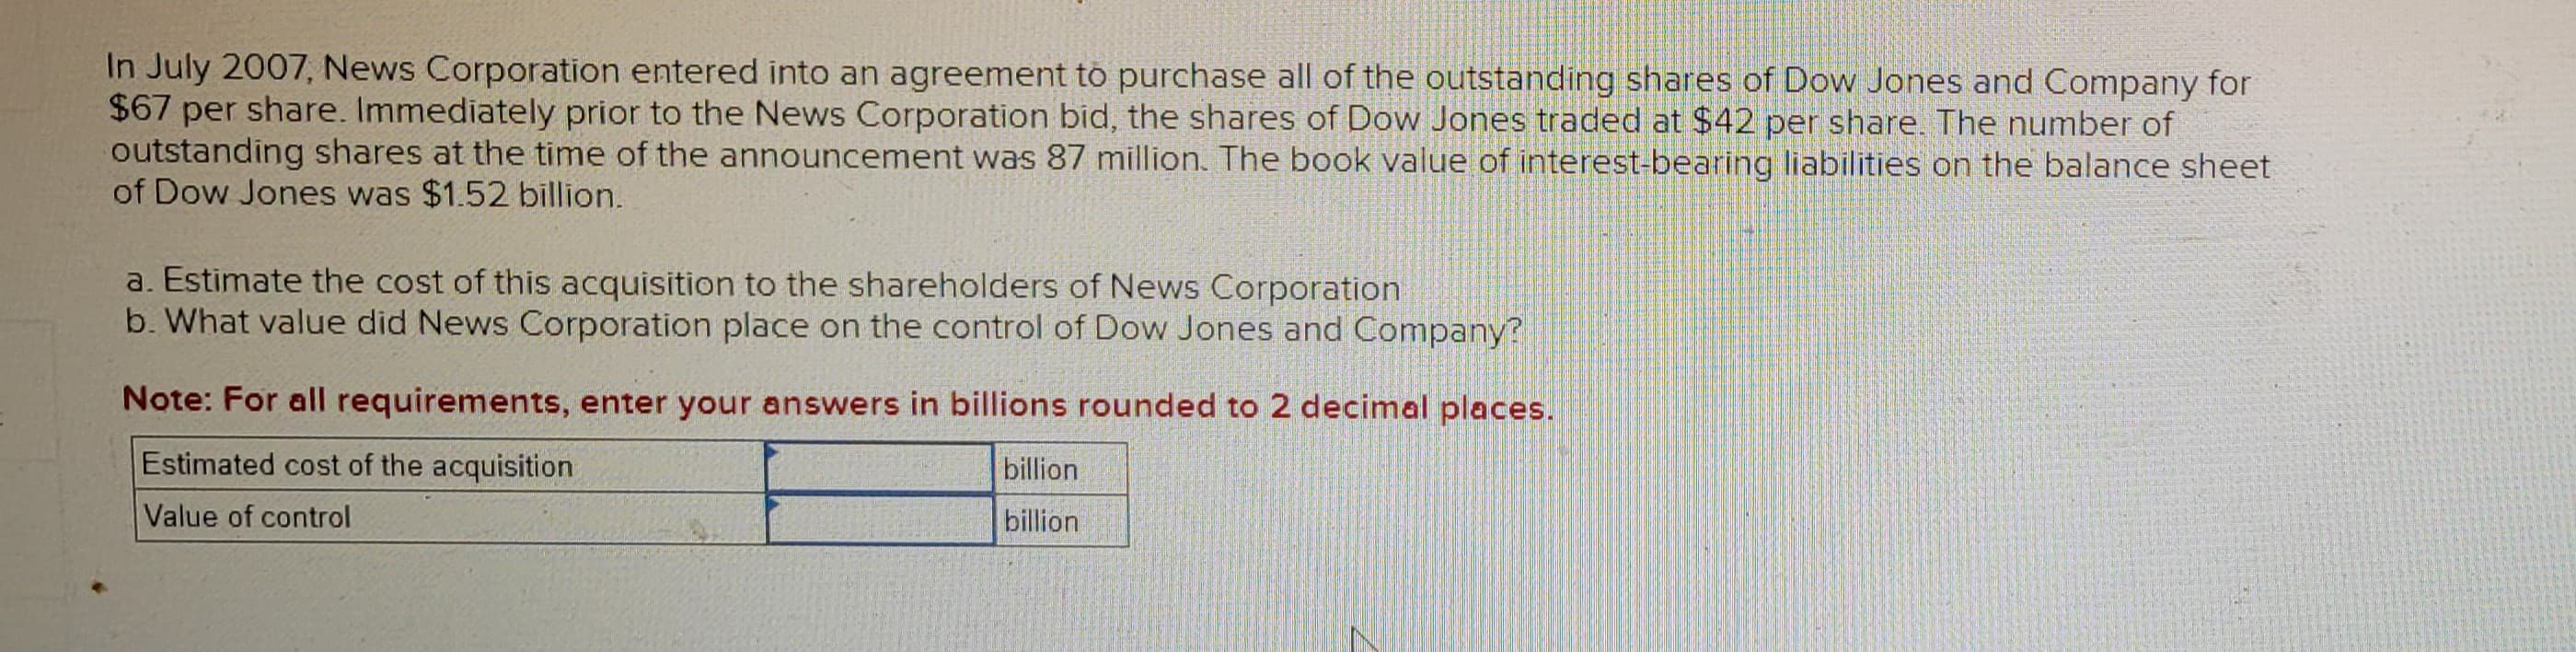 In July 2007, News Corporation entered into an agreement to purchase all of the outstanding shares of Dow Jones and Company for
$67 per share. Immediately prior to the News Corporation bid, the shares of Dow Jones traded at $42 per share. The number of
outstanding shares at the time of the announcement was 87 million. The book value of interest-bearing liabilities on the balance sheet
of Dow Jones was $1.52 billion.
a. Estimate the cost of this acquisition to the shareholders of News Corporation
b. What value did News Corporation place on the control of Dow Jones and Company?
Note: For all requirements, enter your answers in billions rounded to 2 decimal places.
Estimated cost of the acquisition
Value of control
billion
billion